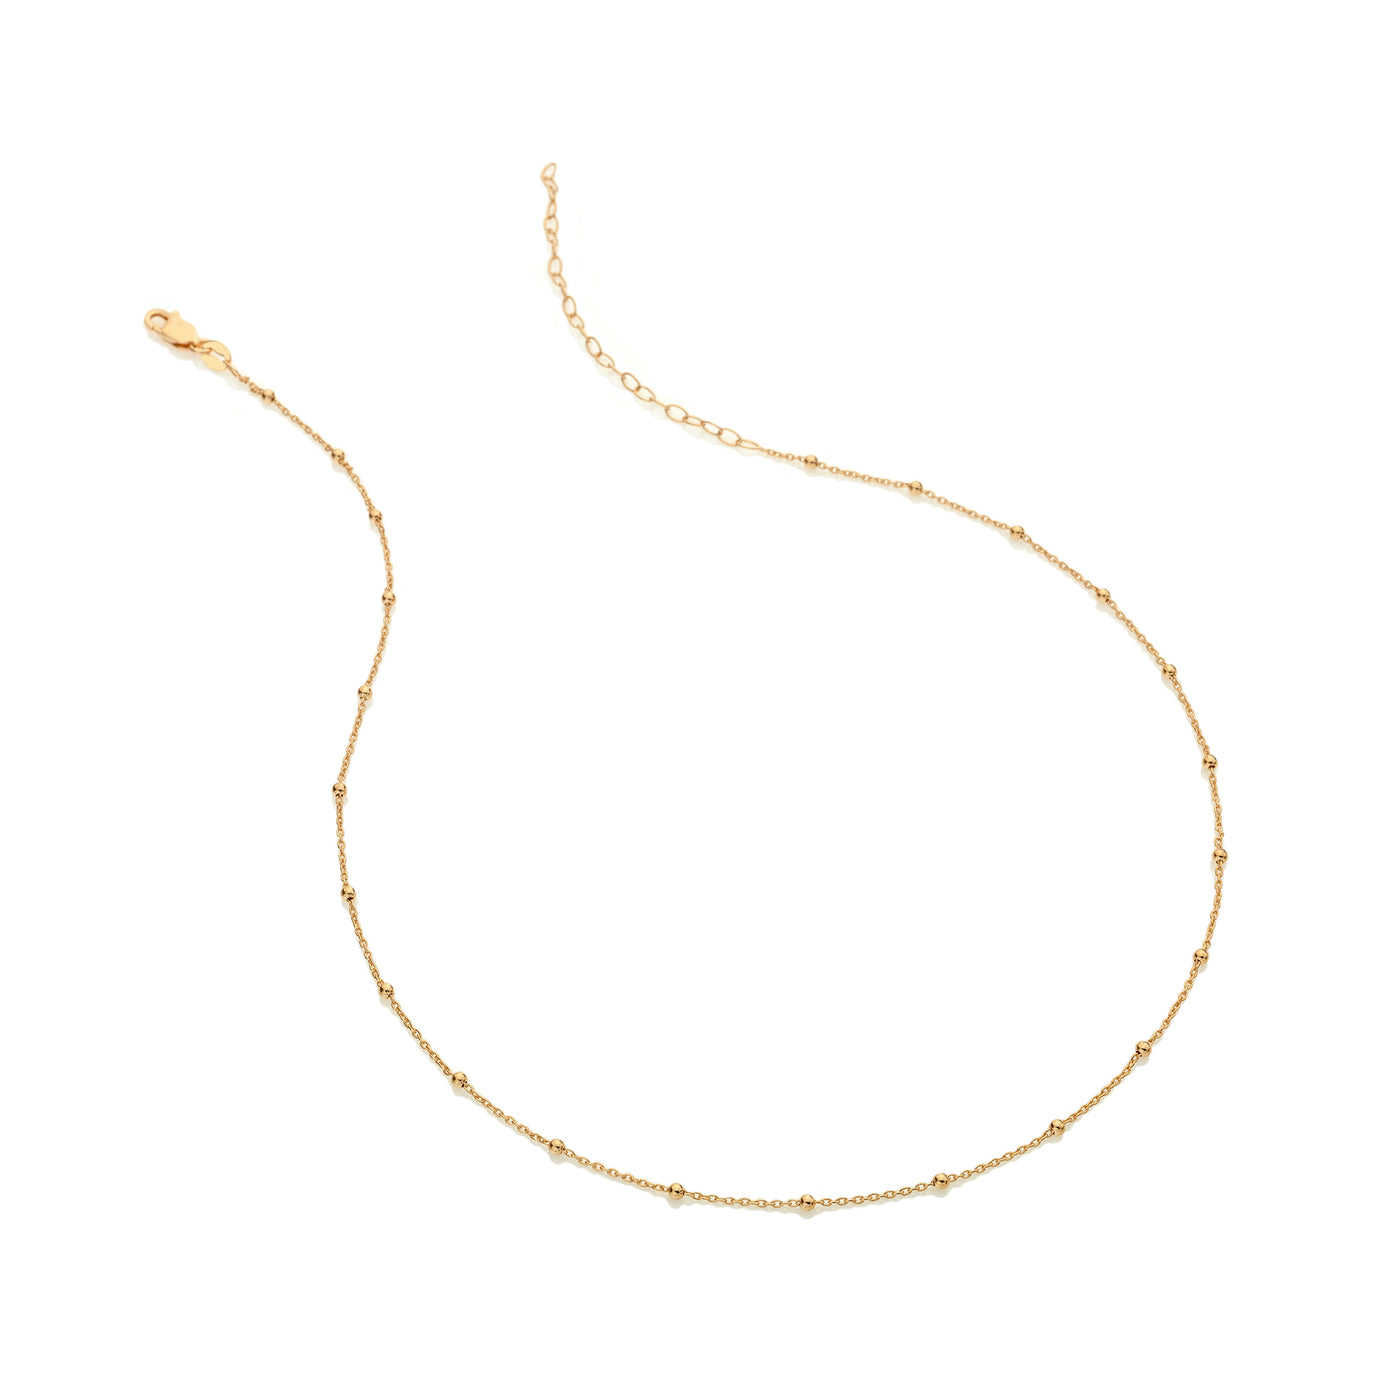 Hot Diamonds by Jac Jossa - 18ct Gold Plated Sterling Silver Embrace Beaded Cable Chain